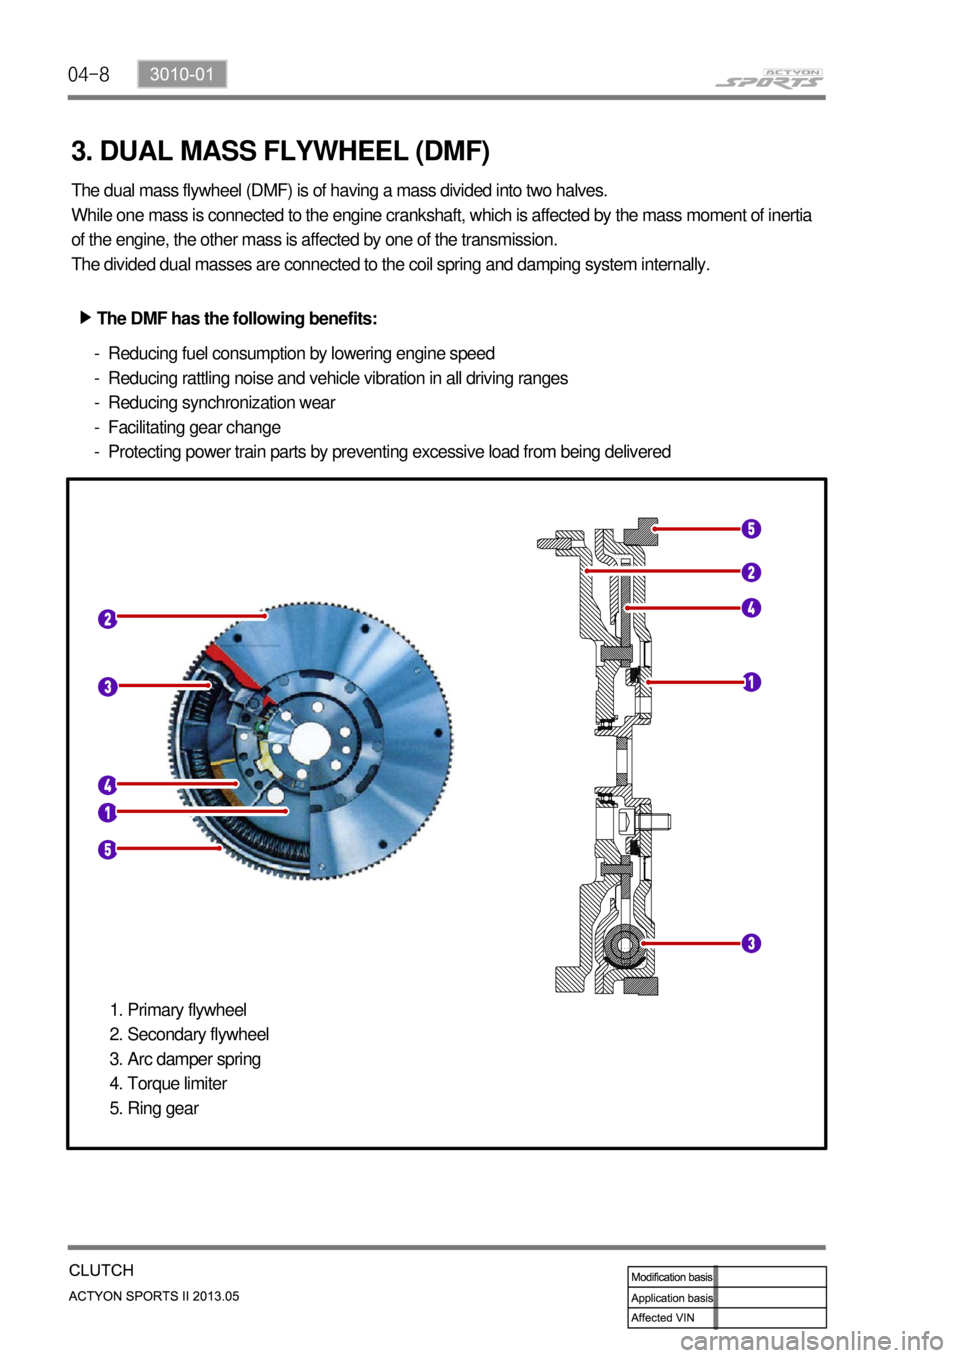 SSANGYONG NEW ACTYON SPORTS 2013  Service Manual 04-8
3. DUAL MASS FLYWHEEL (DMF)
The dual mass flywheel (DMF) is of having a mass divided into two halves.
While one mass is connected to the engine crankshaft, which is affected by the mass moment of